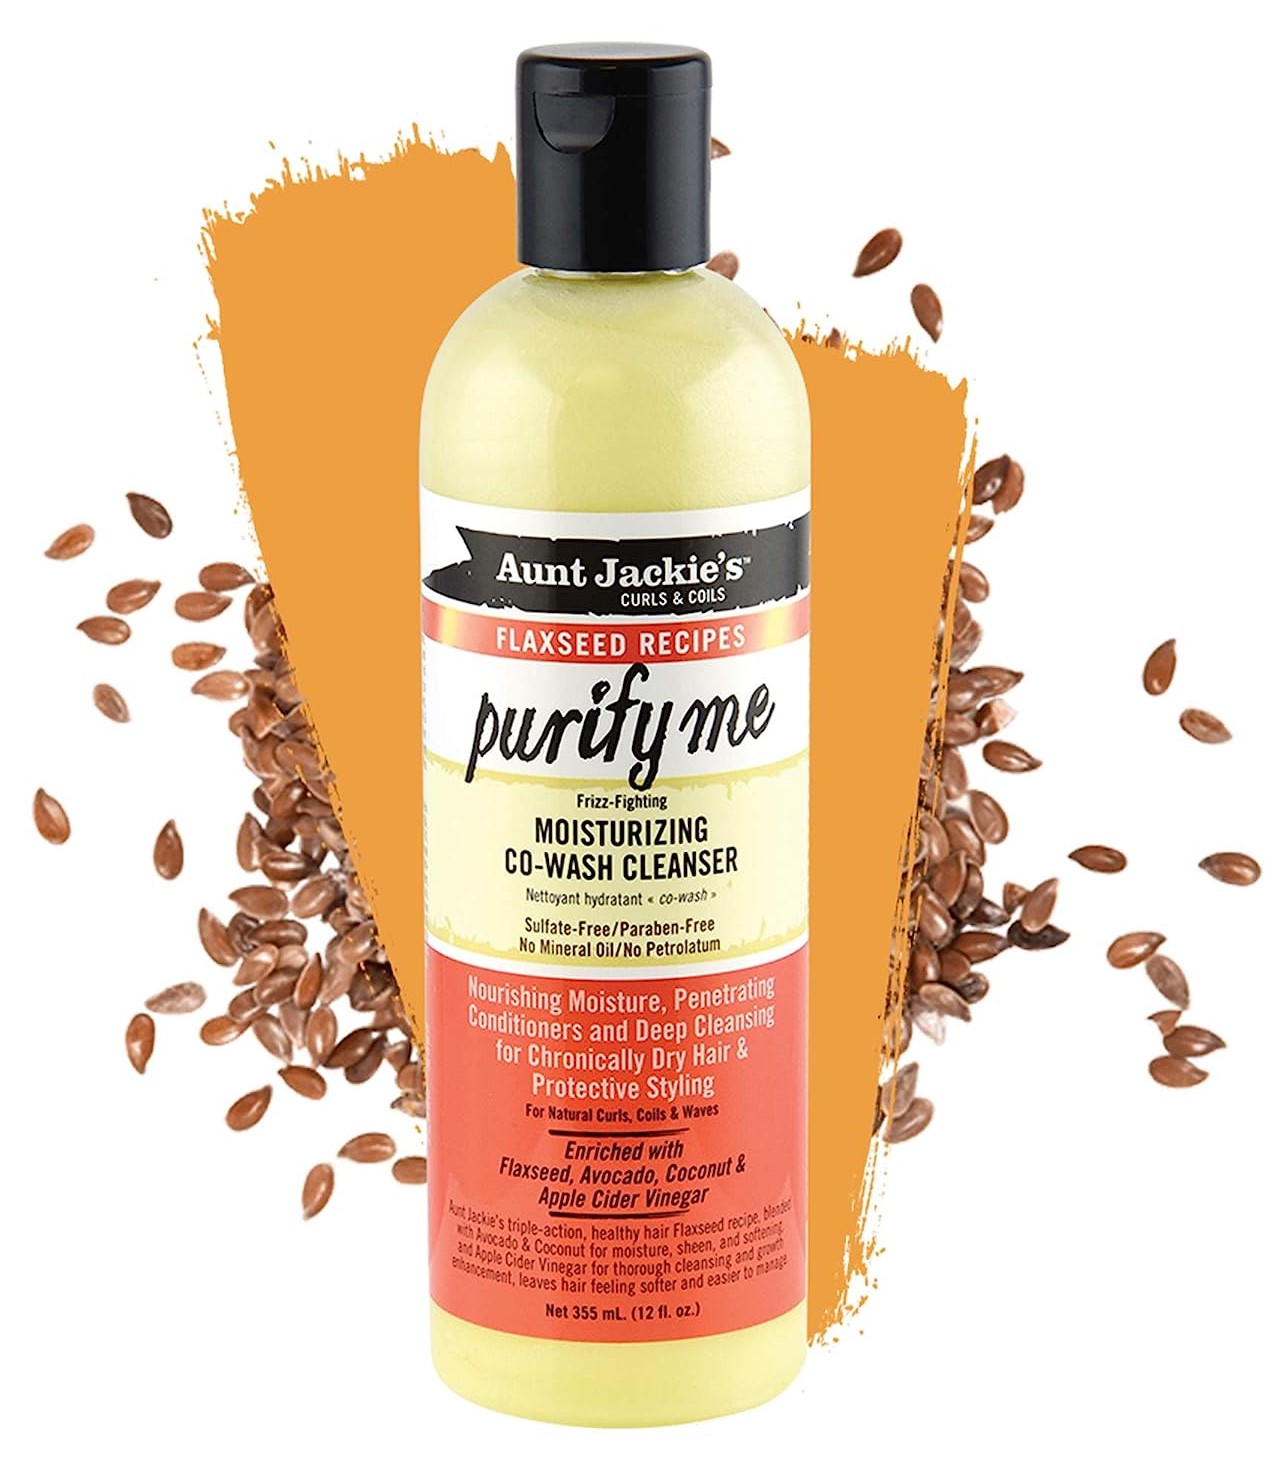 Aunt Jackie's Flaxseed Recipes Purify Me Moisturizing Co-Wash Cleanser